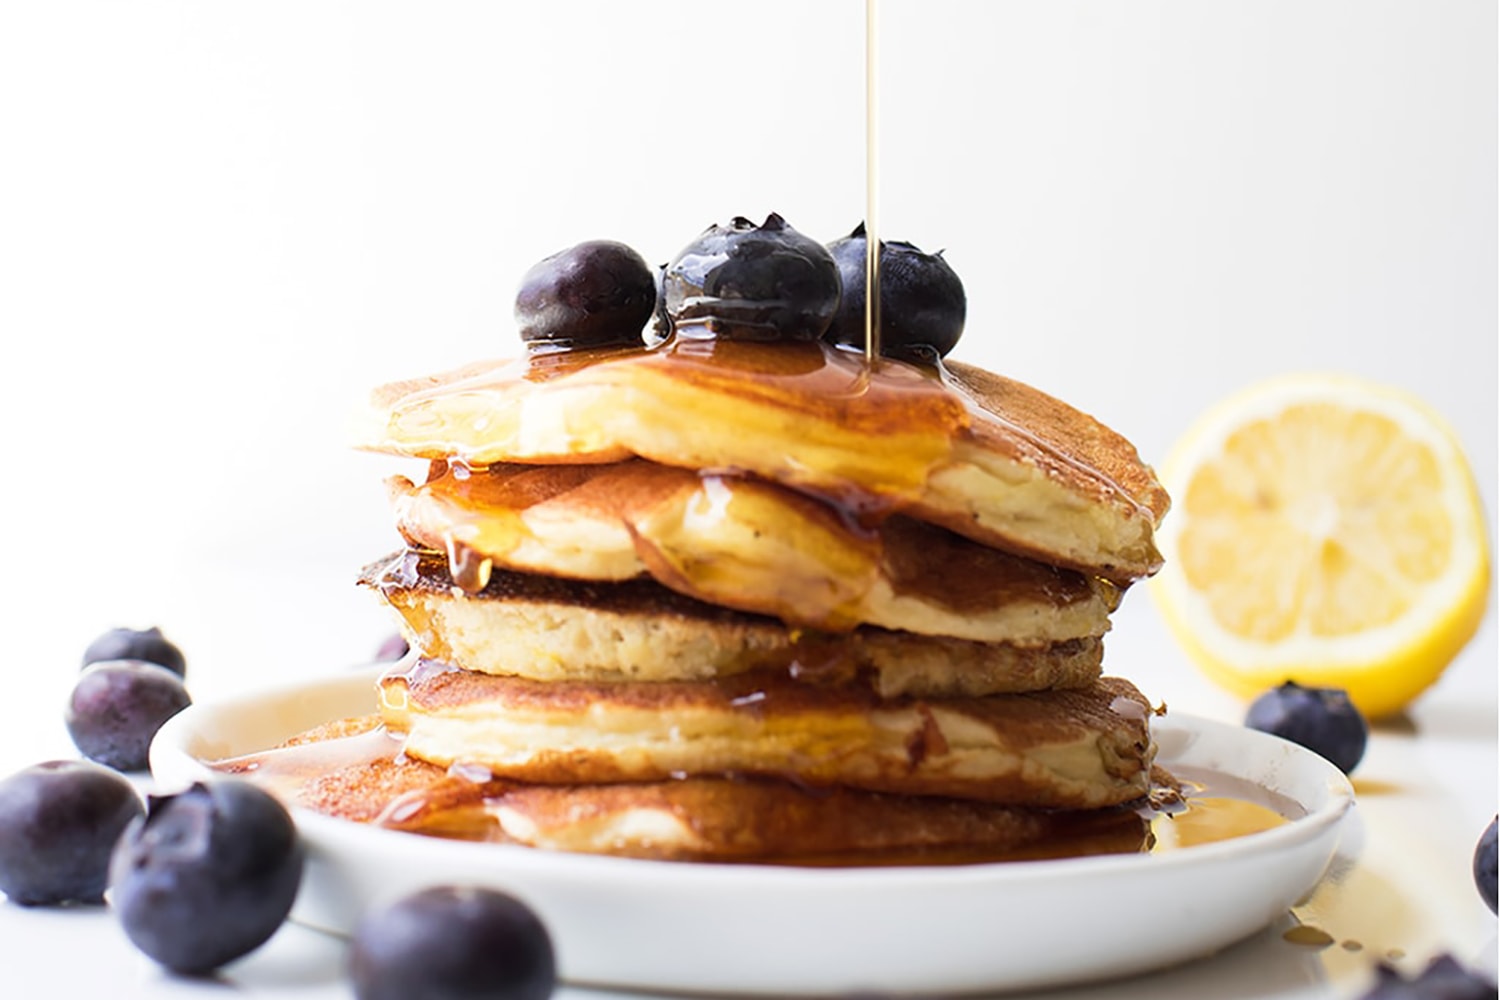 Protein Pancakes Recipe – A Healthy, Easy Breakfast! - Let's Eat Cake